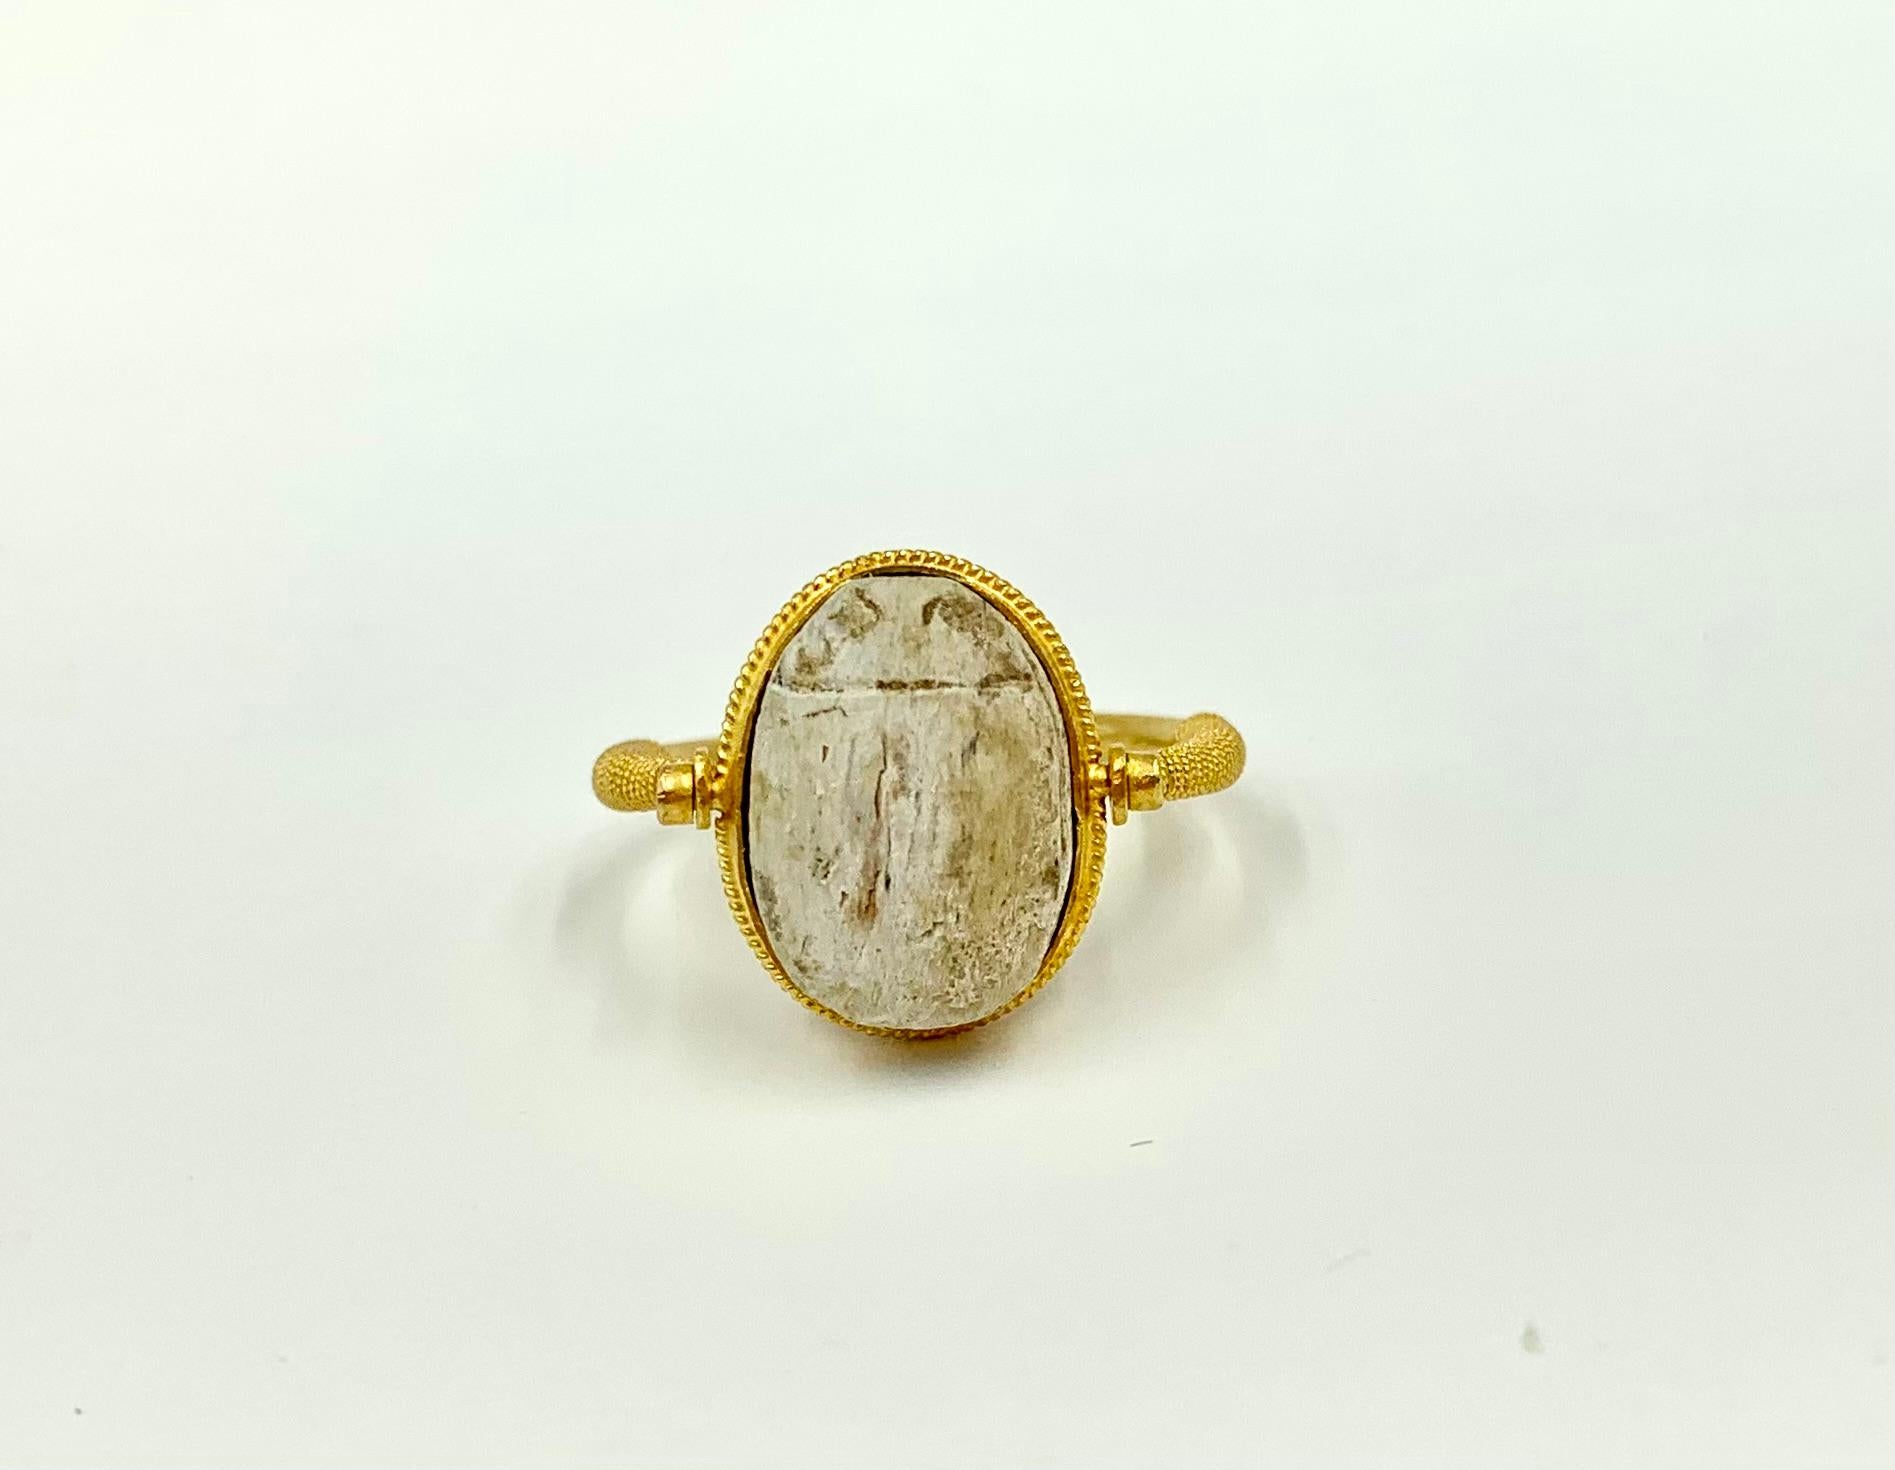 Egyptian Revival Ancient Egyptian Steatite Scarab Amulet 22K Yellow Gold Swivel Signet Ring For Sale